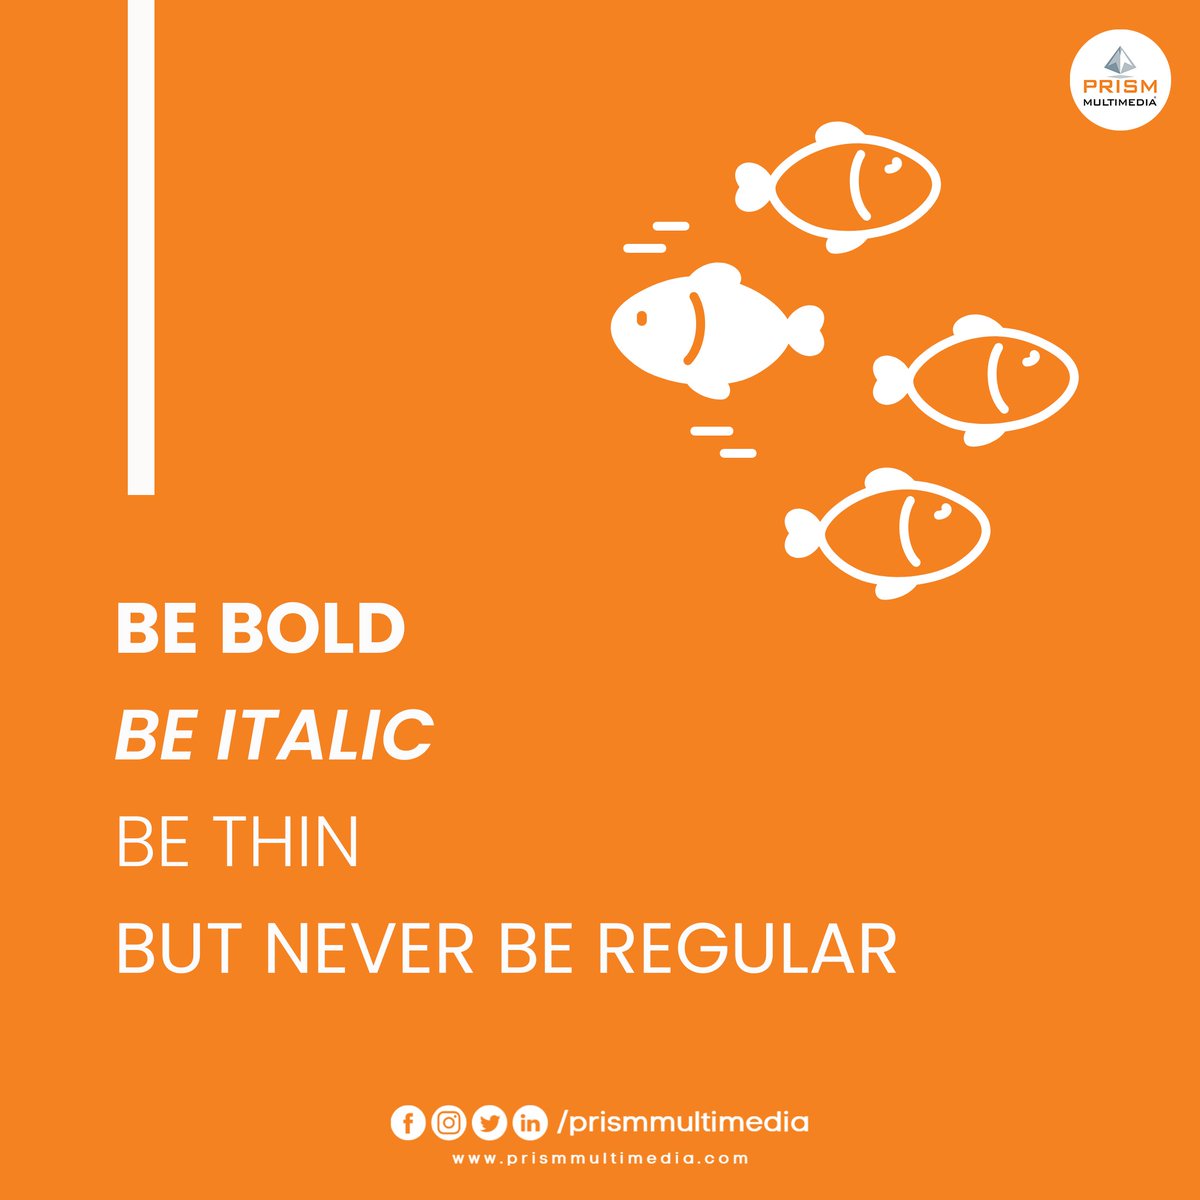 🌈 Be bold like your dreams ✨, italicize your passions , and thin out the negativity . Just don't be regular . Be YOUnique! 🔠✨ 

#FontFinesse #prismmultimedia #CreativeTypography #ExpressiveDesign #typography #fontlove #fontsofinstagram #daretobedifferent #beyou #standout